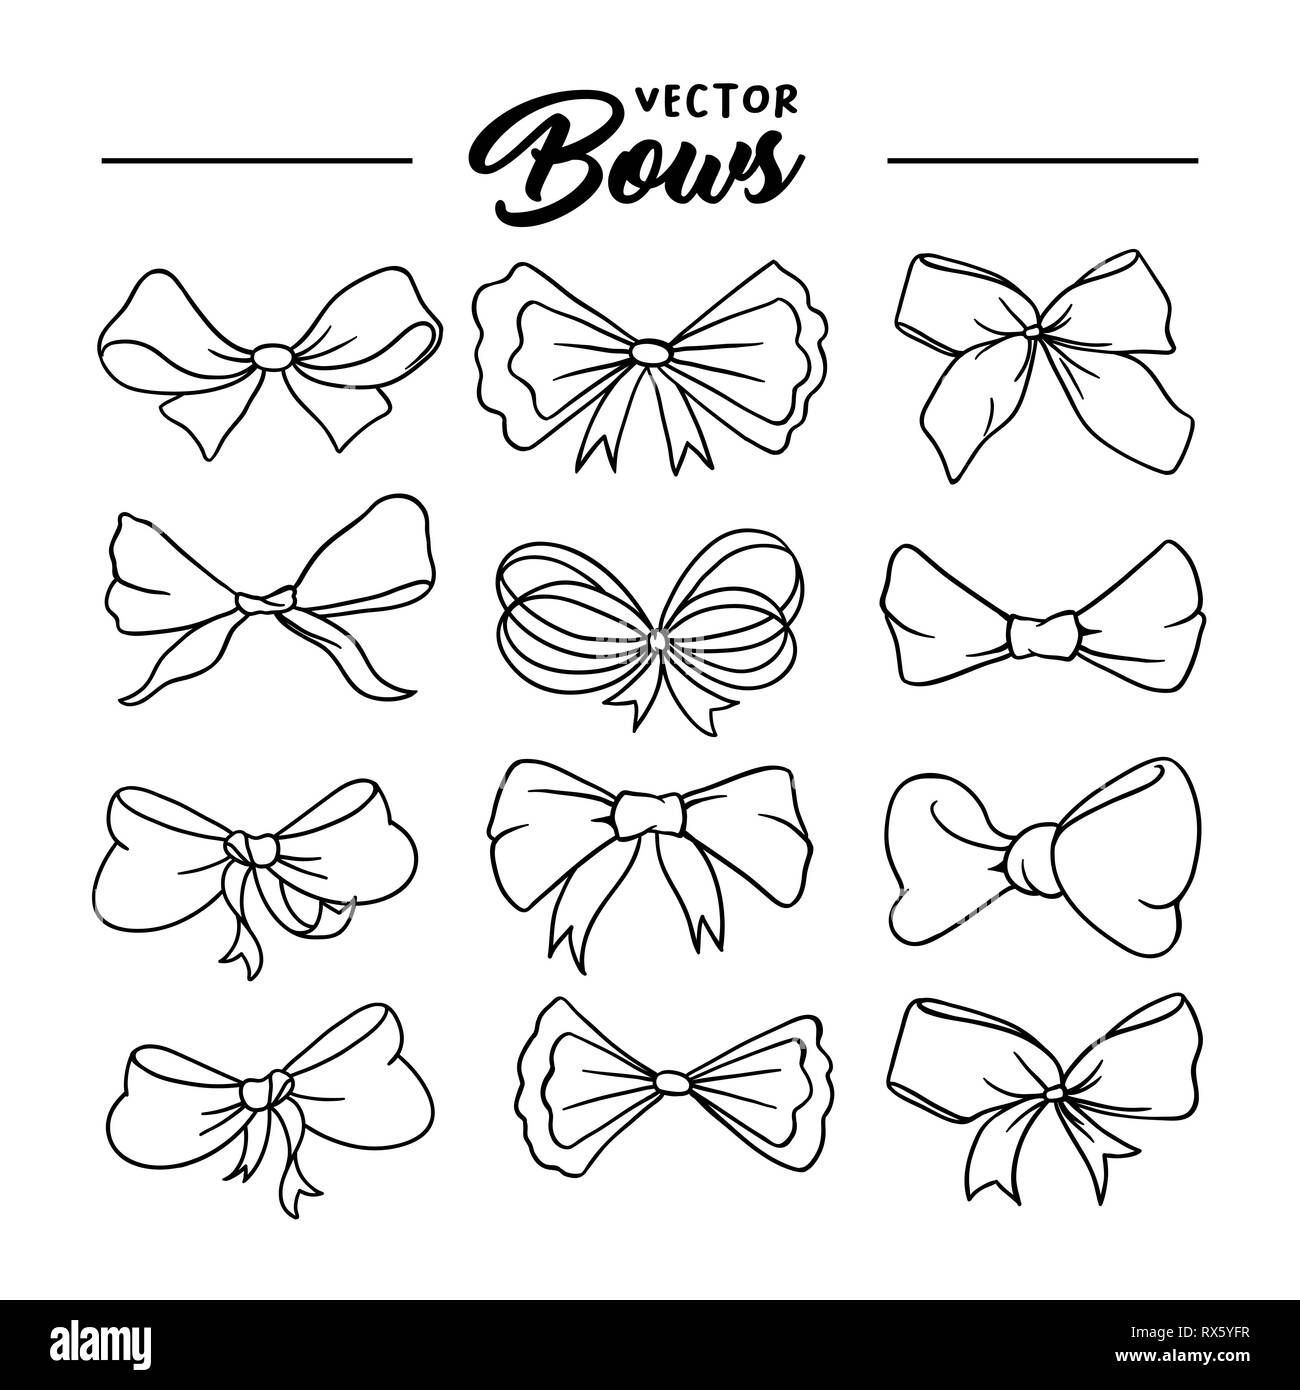 Bows handdrawn illustrations set. Ribbon knots linear drawings. Ink pen bowknots contour cliparts. Bow-tie sketches outline collection. Coloring book, greeting card thin line isolated design elements Stock Vector